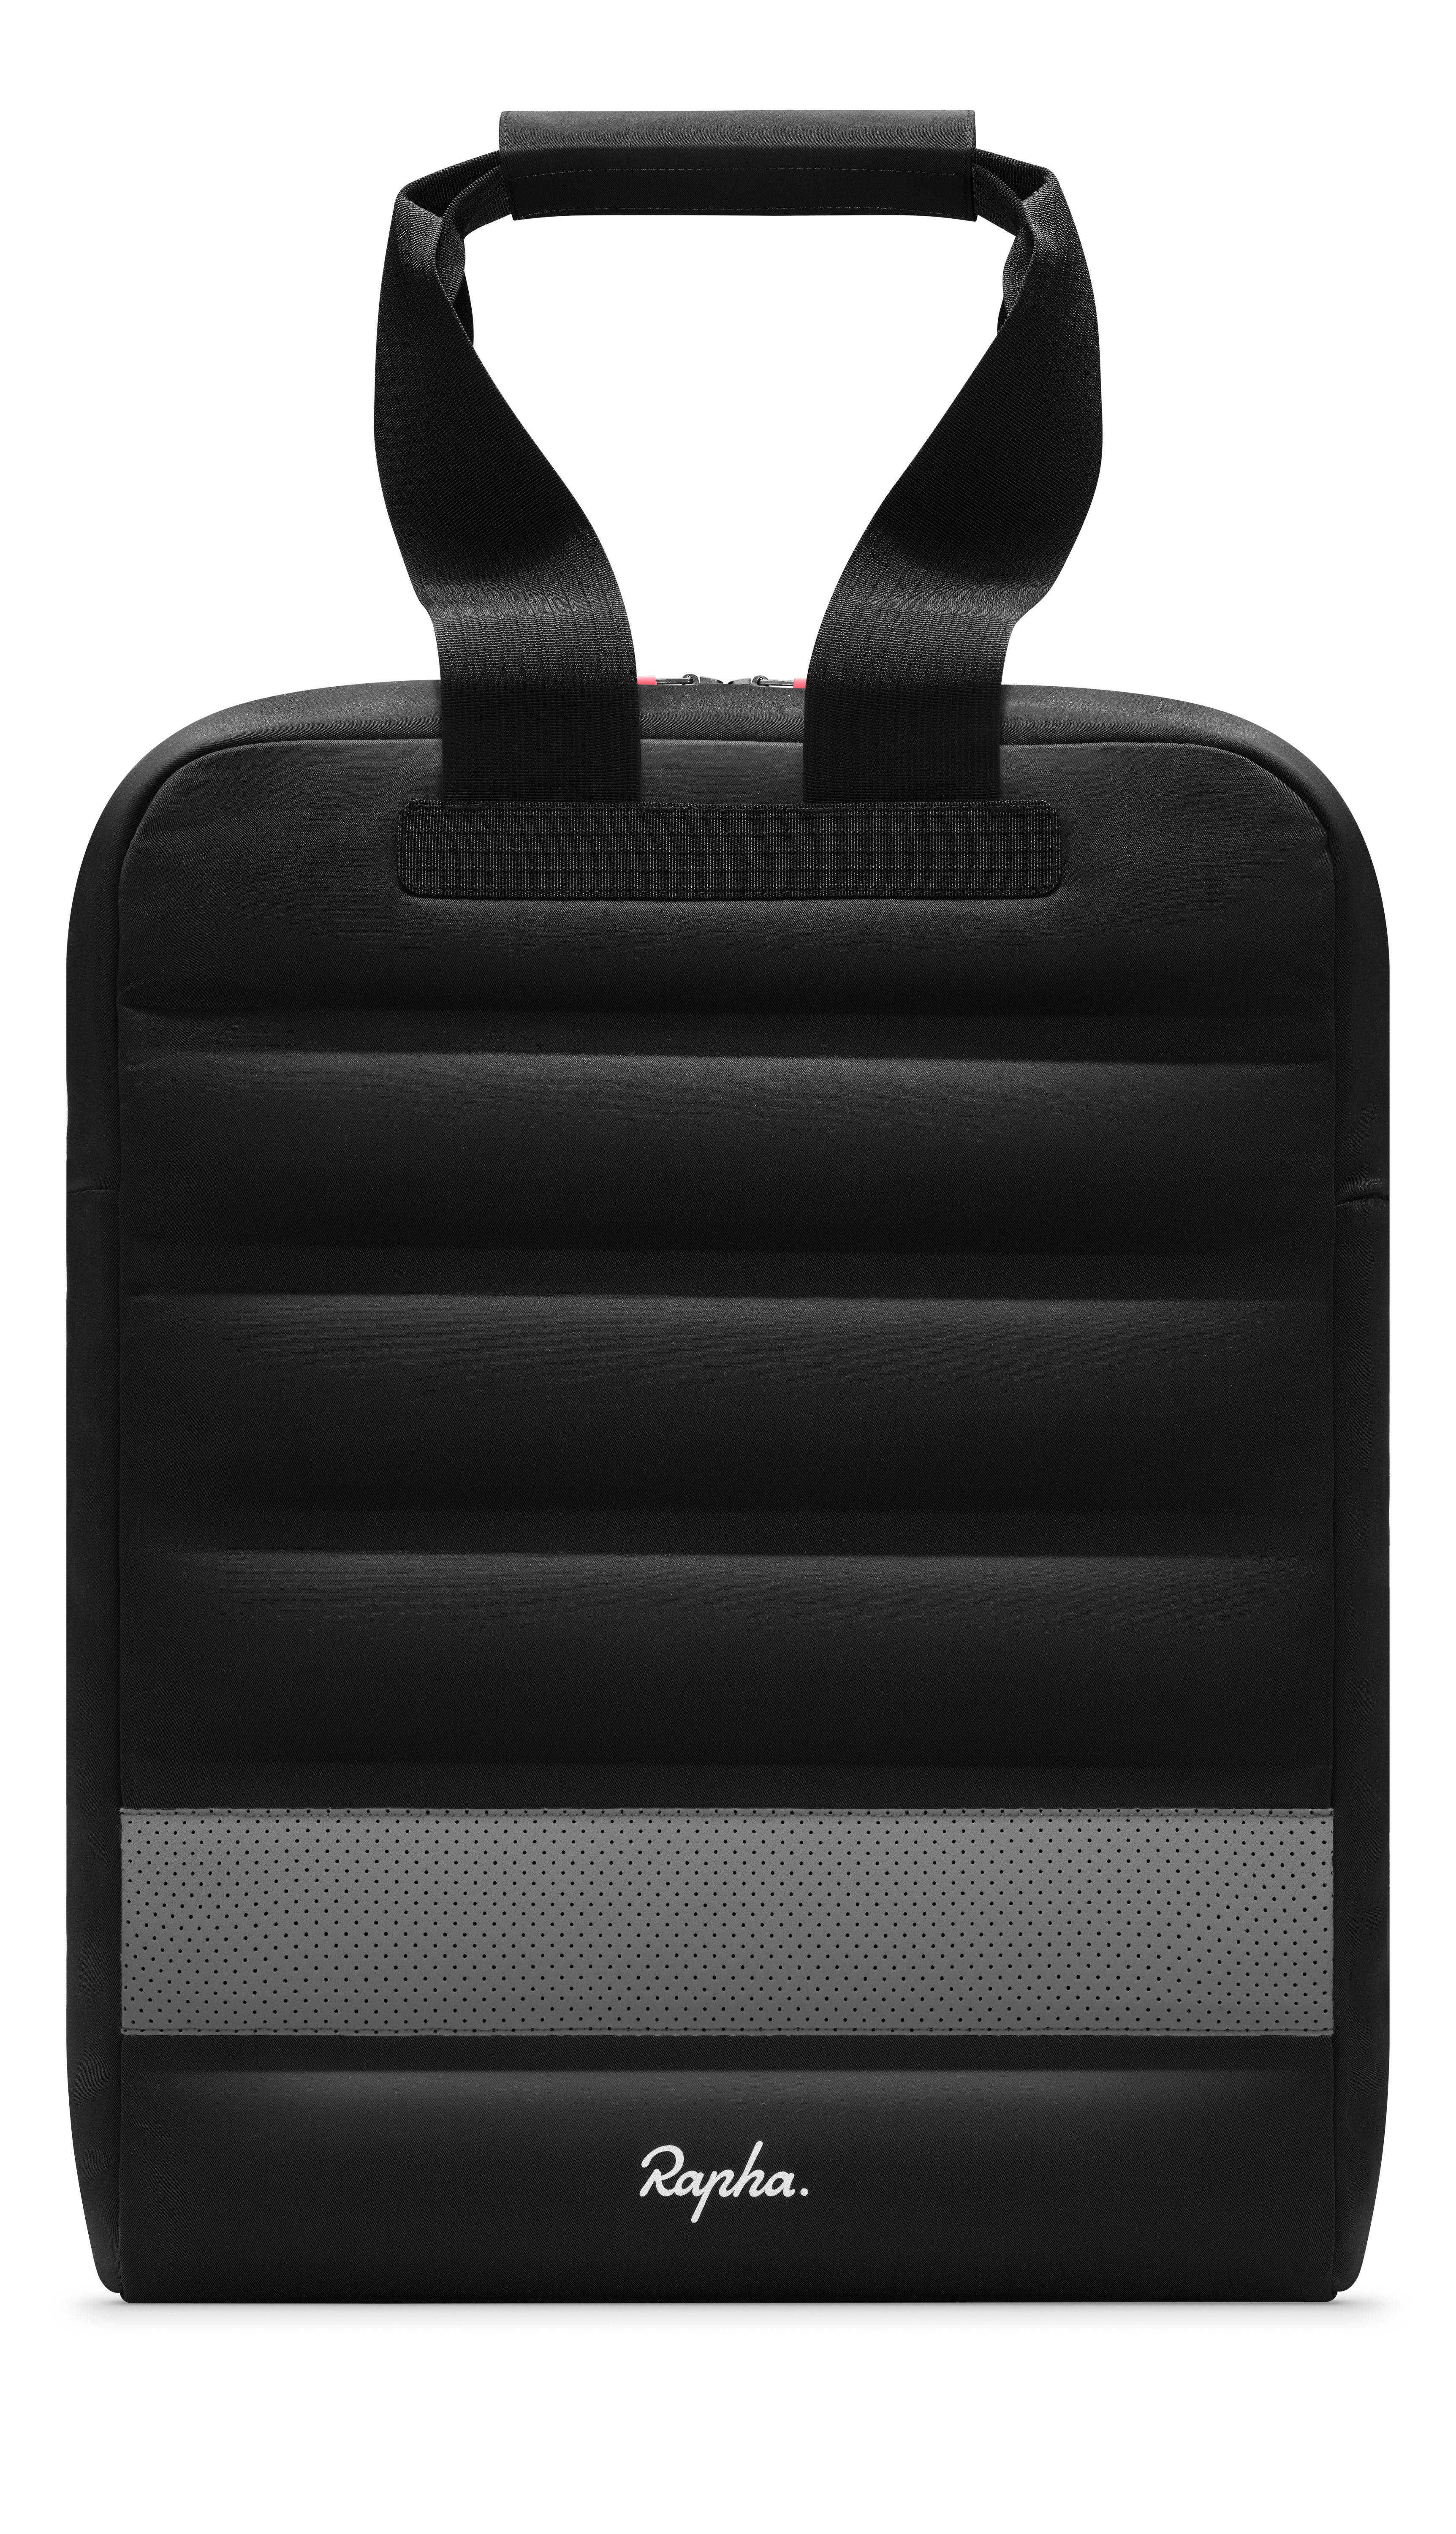 Rapha Cycling Bags- Apple Store Exclusive